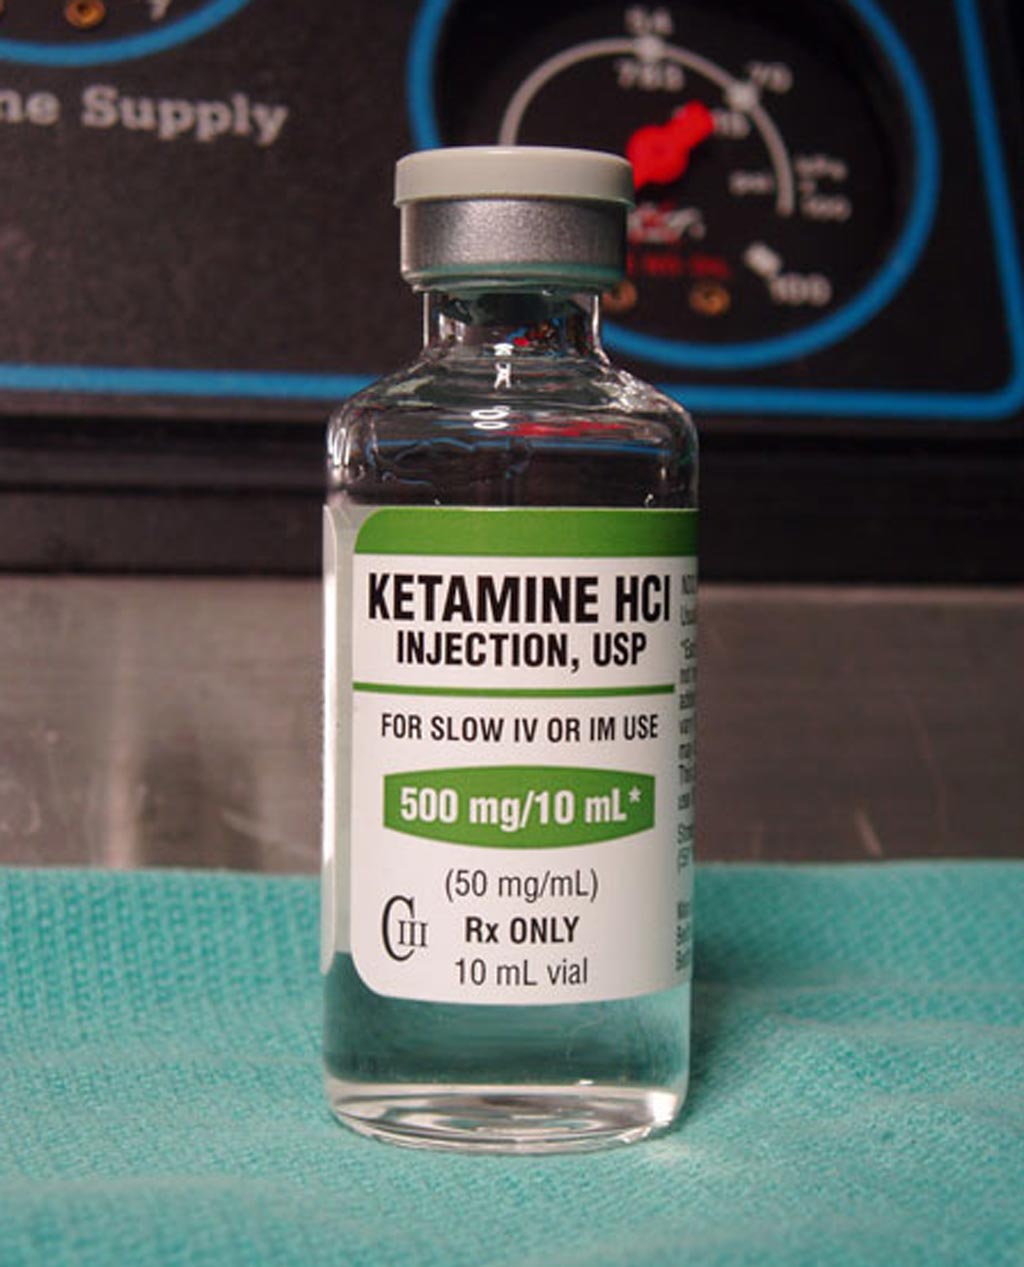 Image: New research suggests ketamine can rapidly reduce suicidal thoughts in the depressed (Photo courtesy of Erowid).